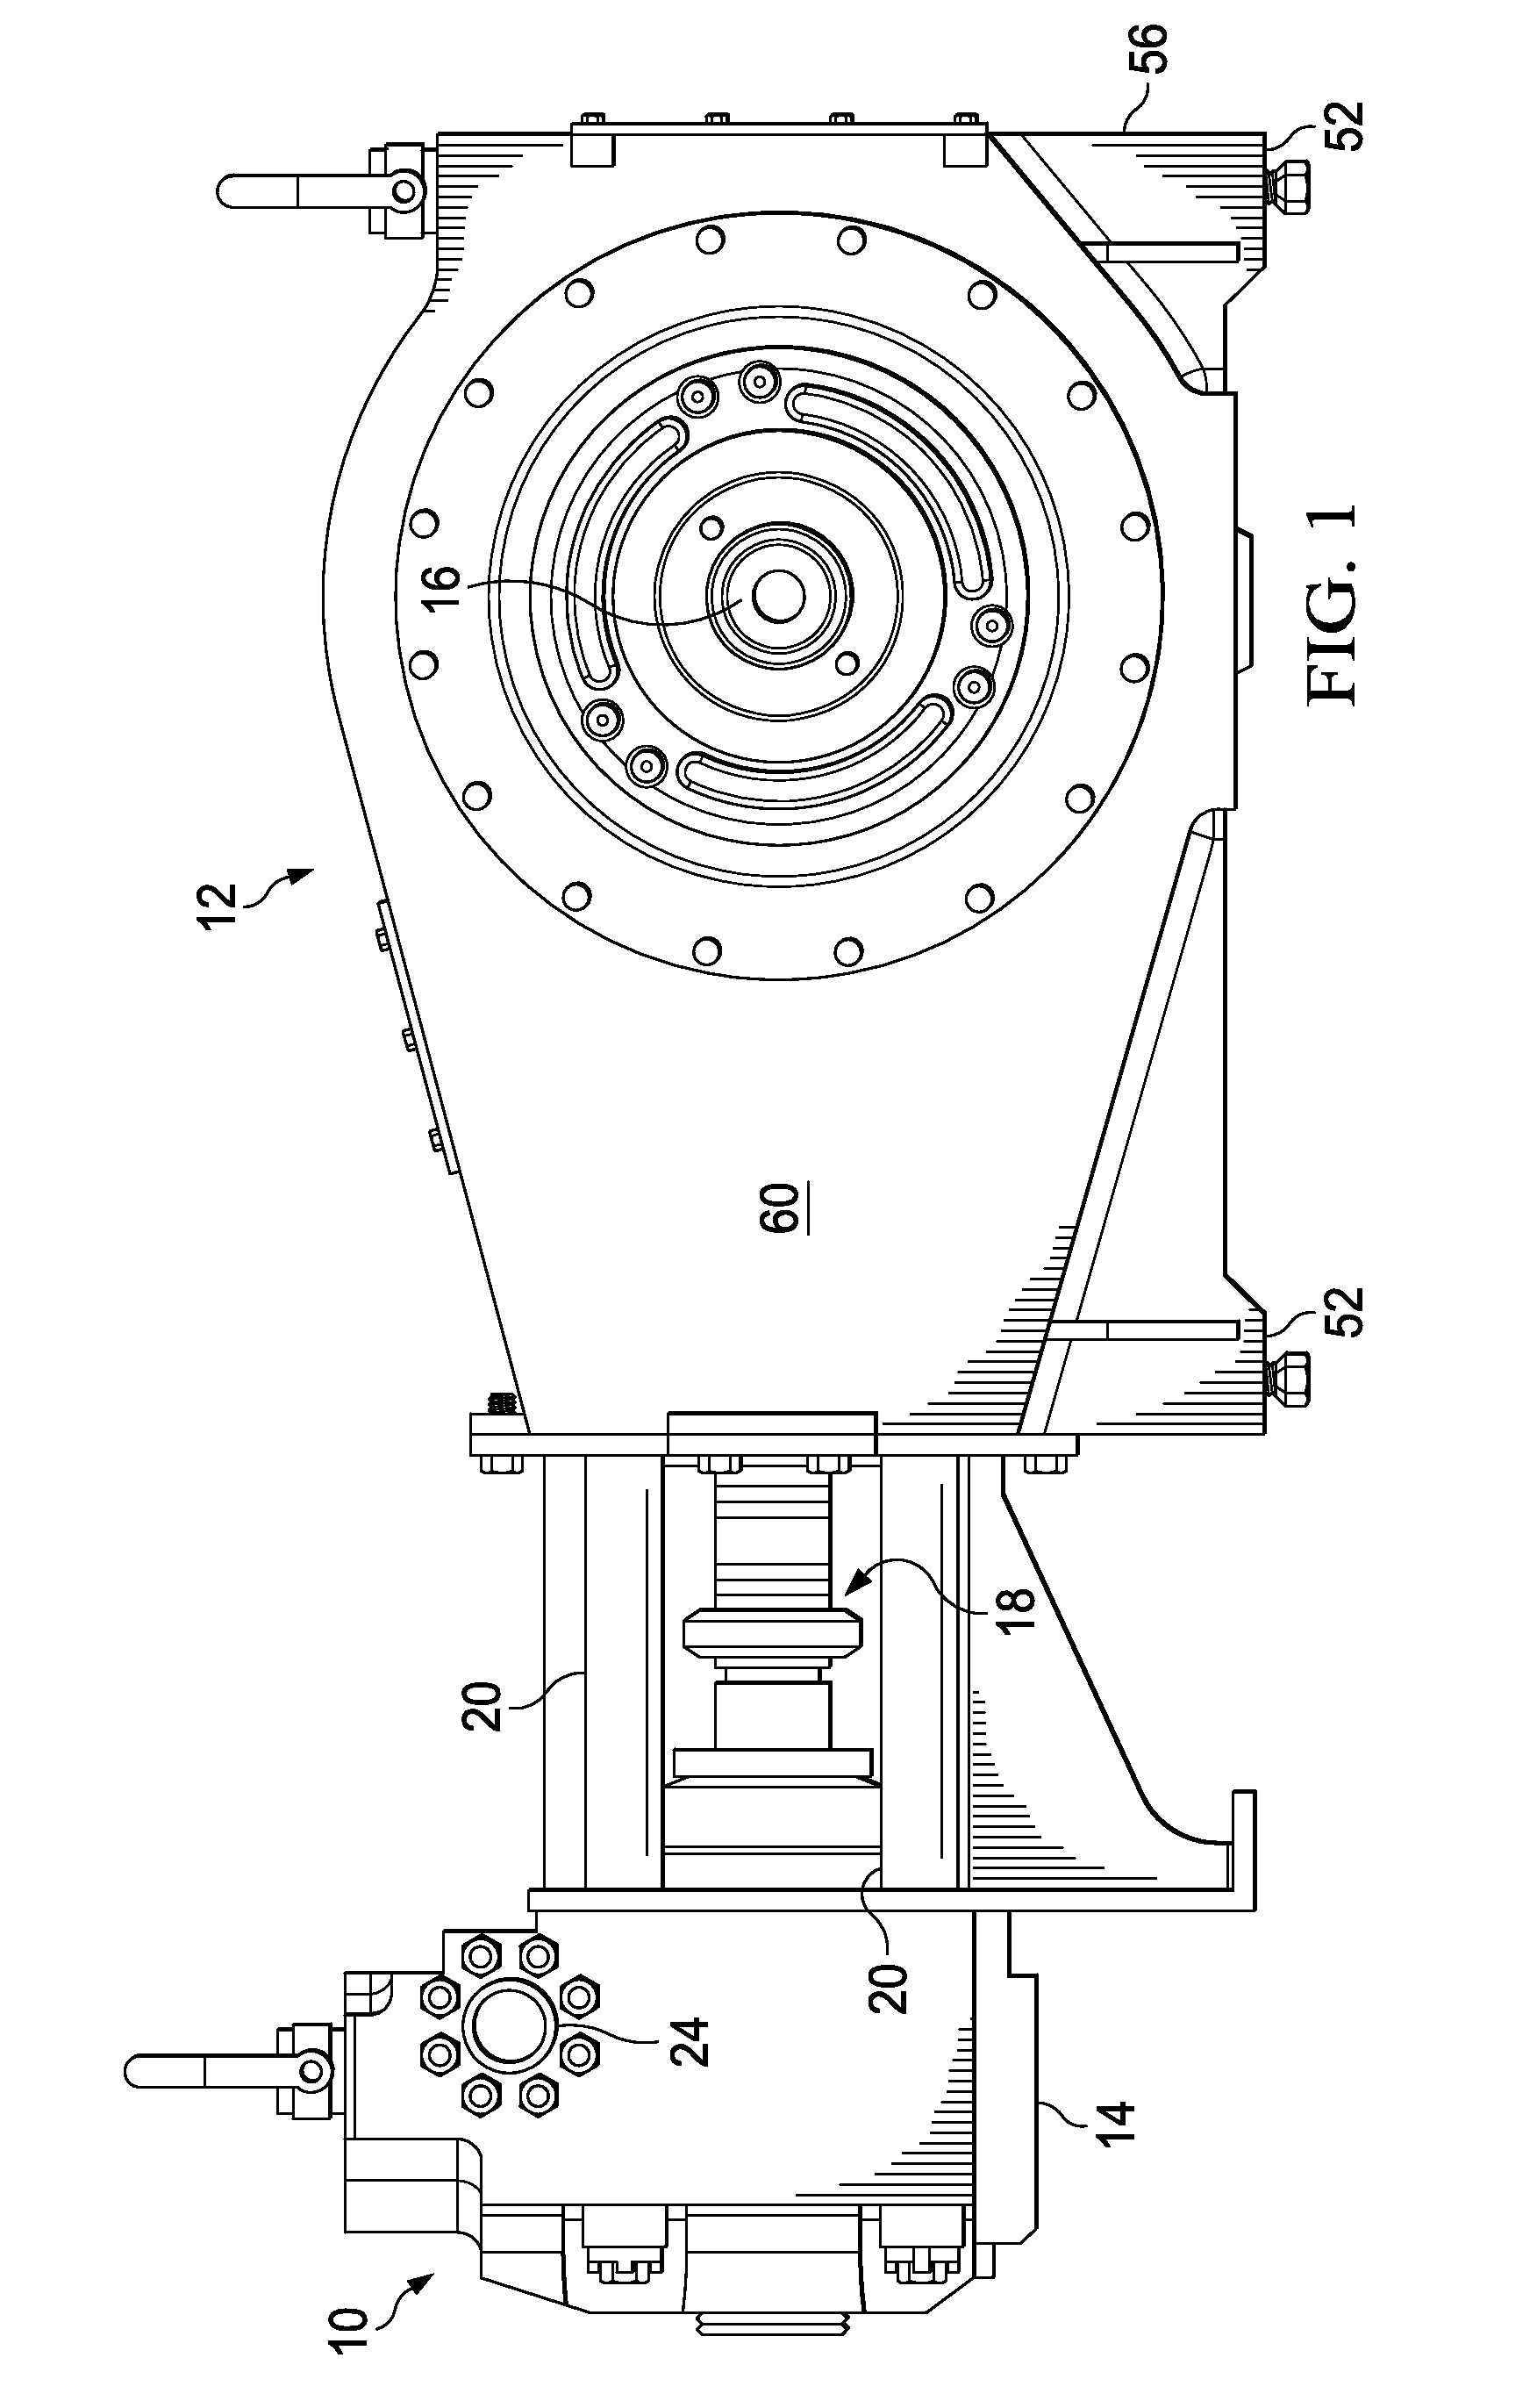 System and method for reinforcing reciprocating pump